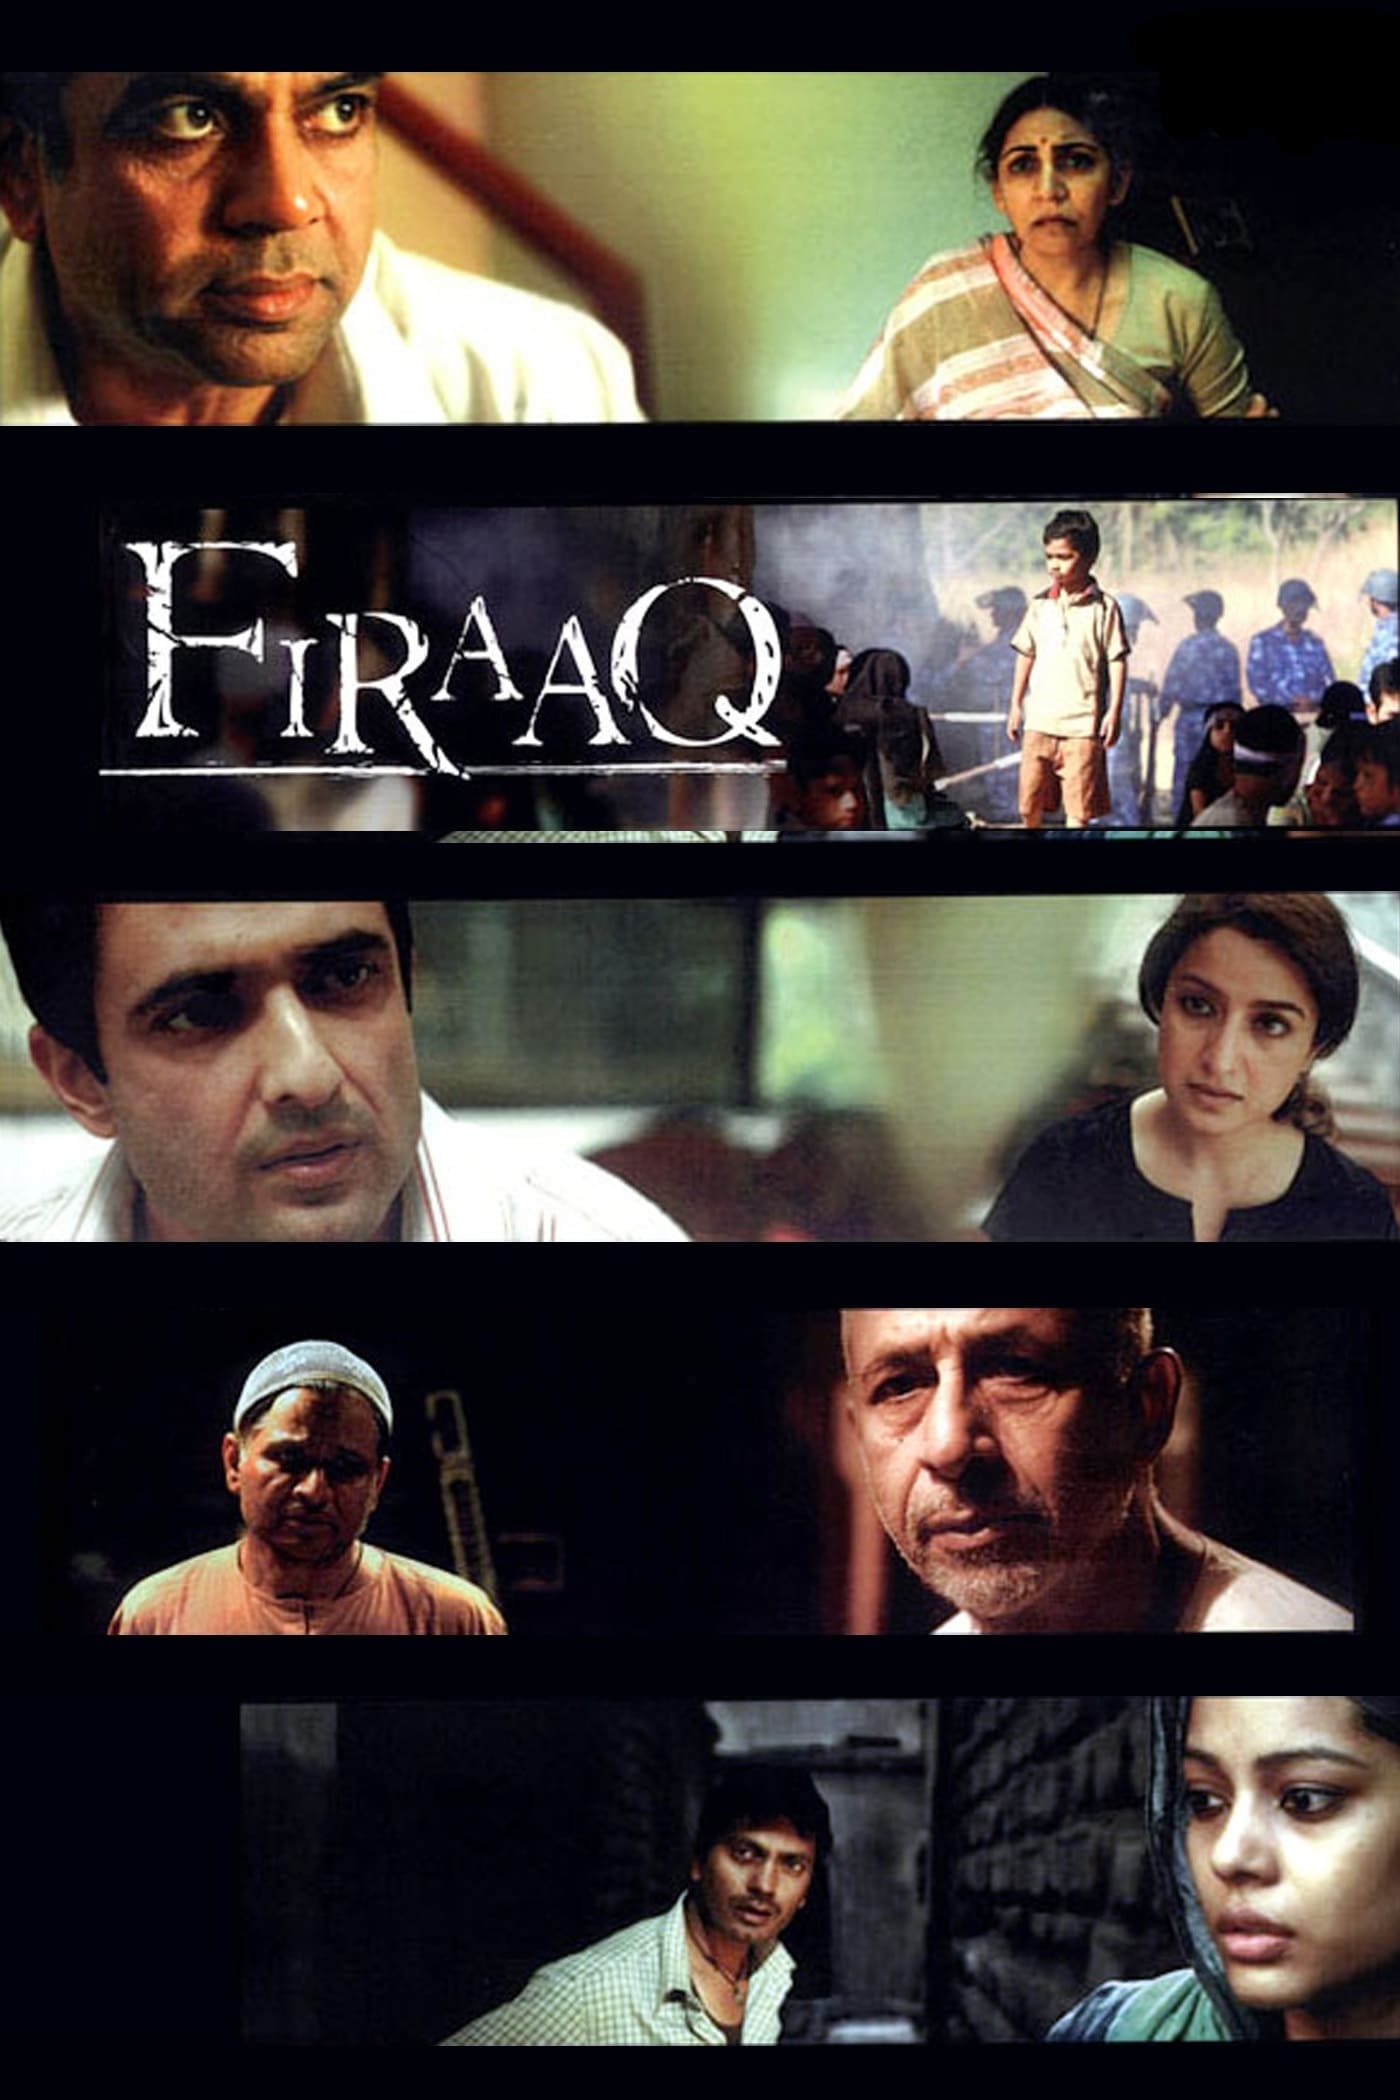 Poster for the movie "Firaaq"